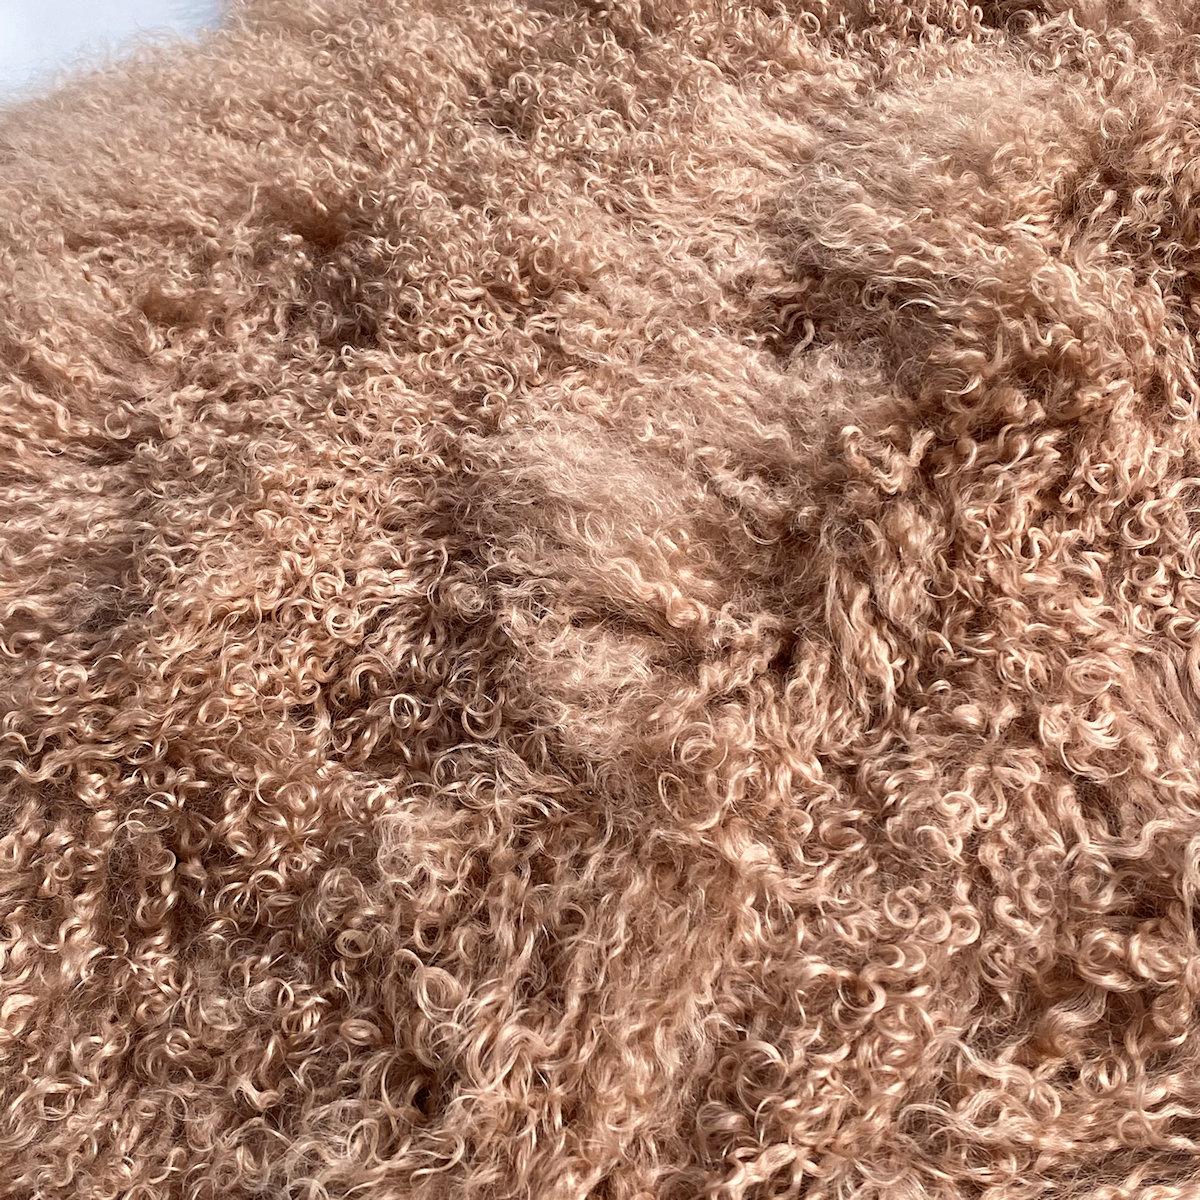 Elevate the luxury of your decor with this Mongolian Fur rug. Whether styling a nursery or adding luxury elements to a bedroom, this exquisite pink fur rug will uplift the elegance and ambiance of your room. This piece gives you versatility in